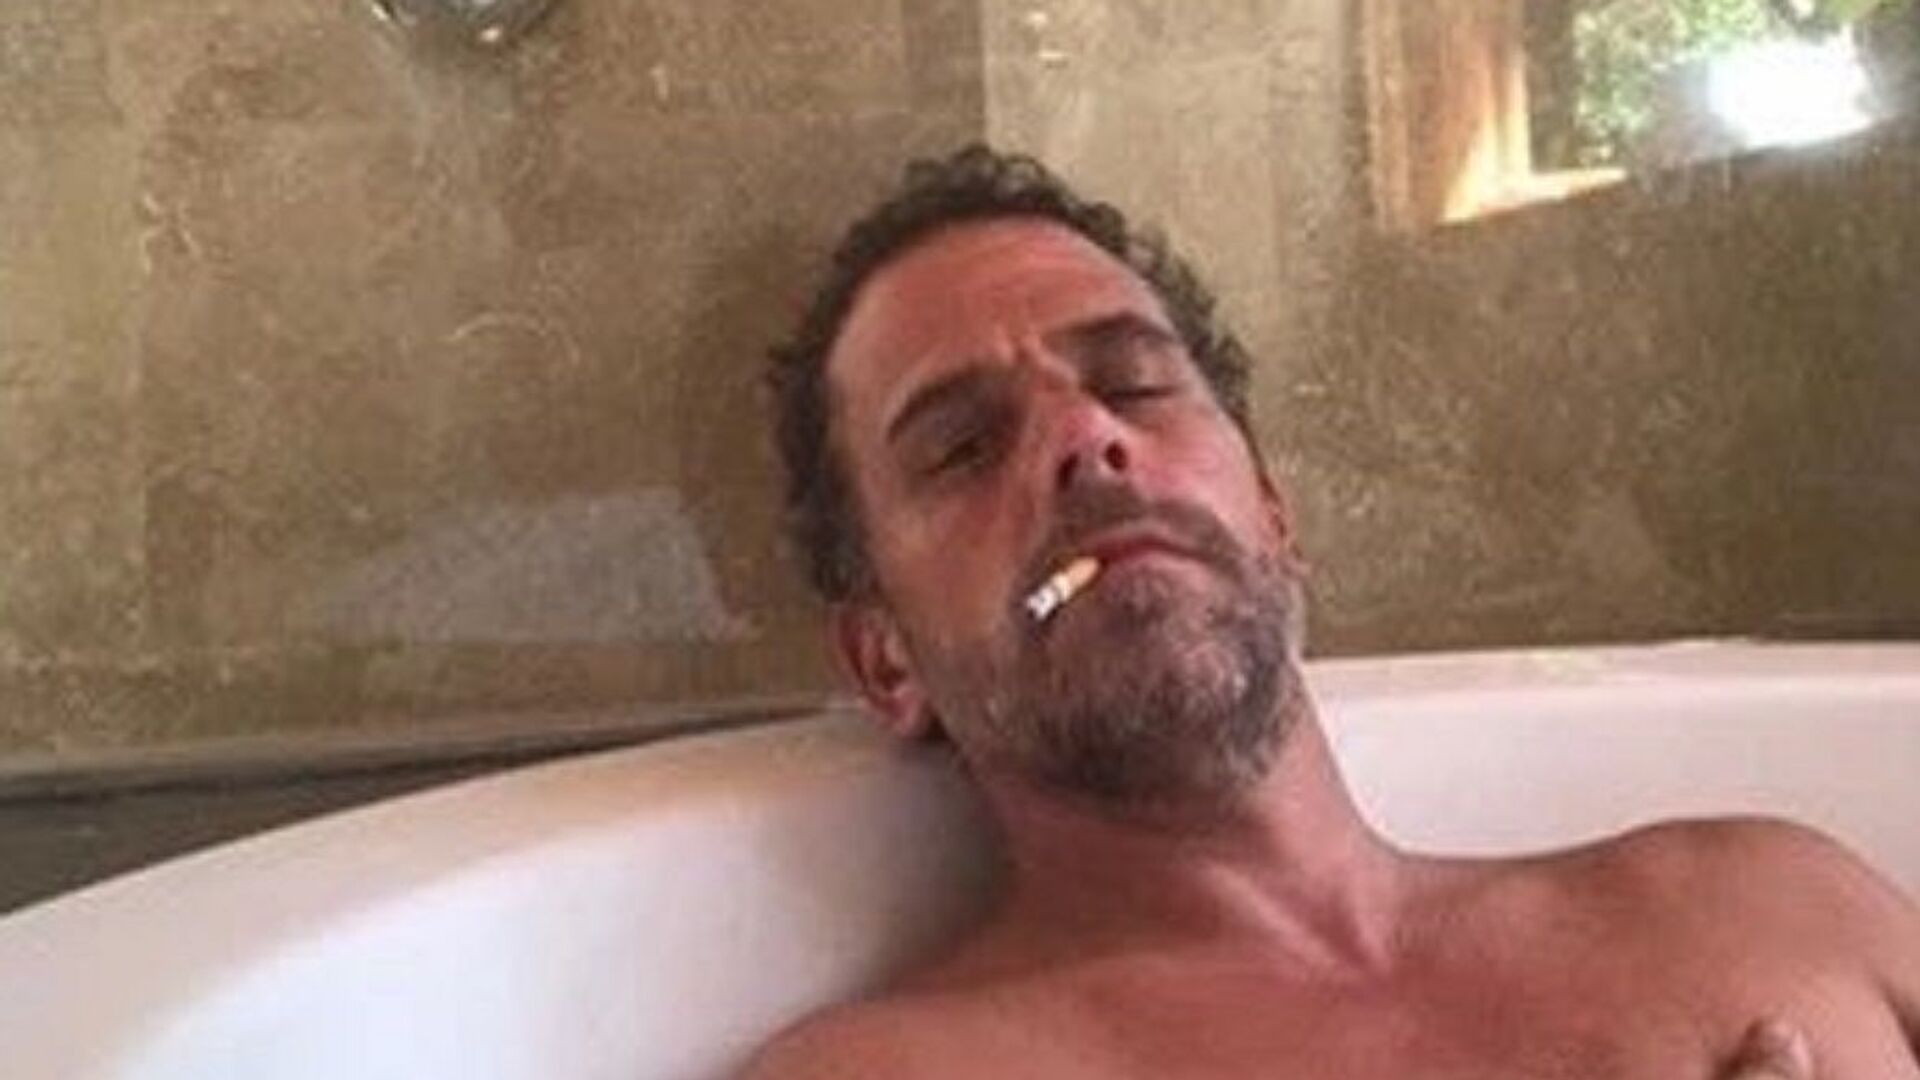 Photo of Hunter Biden relaxing in a bathtub, reportedly taken from a computer dropped off at a Delaware computer repair shop. - Sputnik International, 1920, 25.04.2022